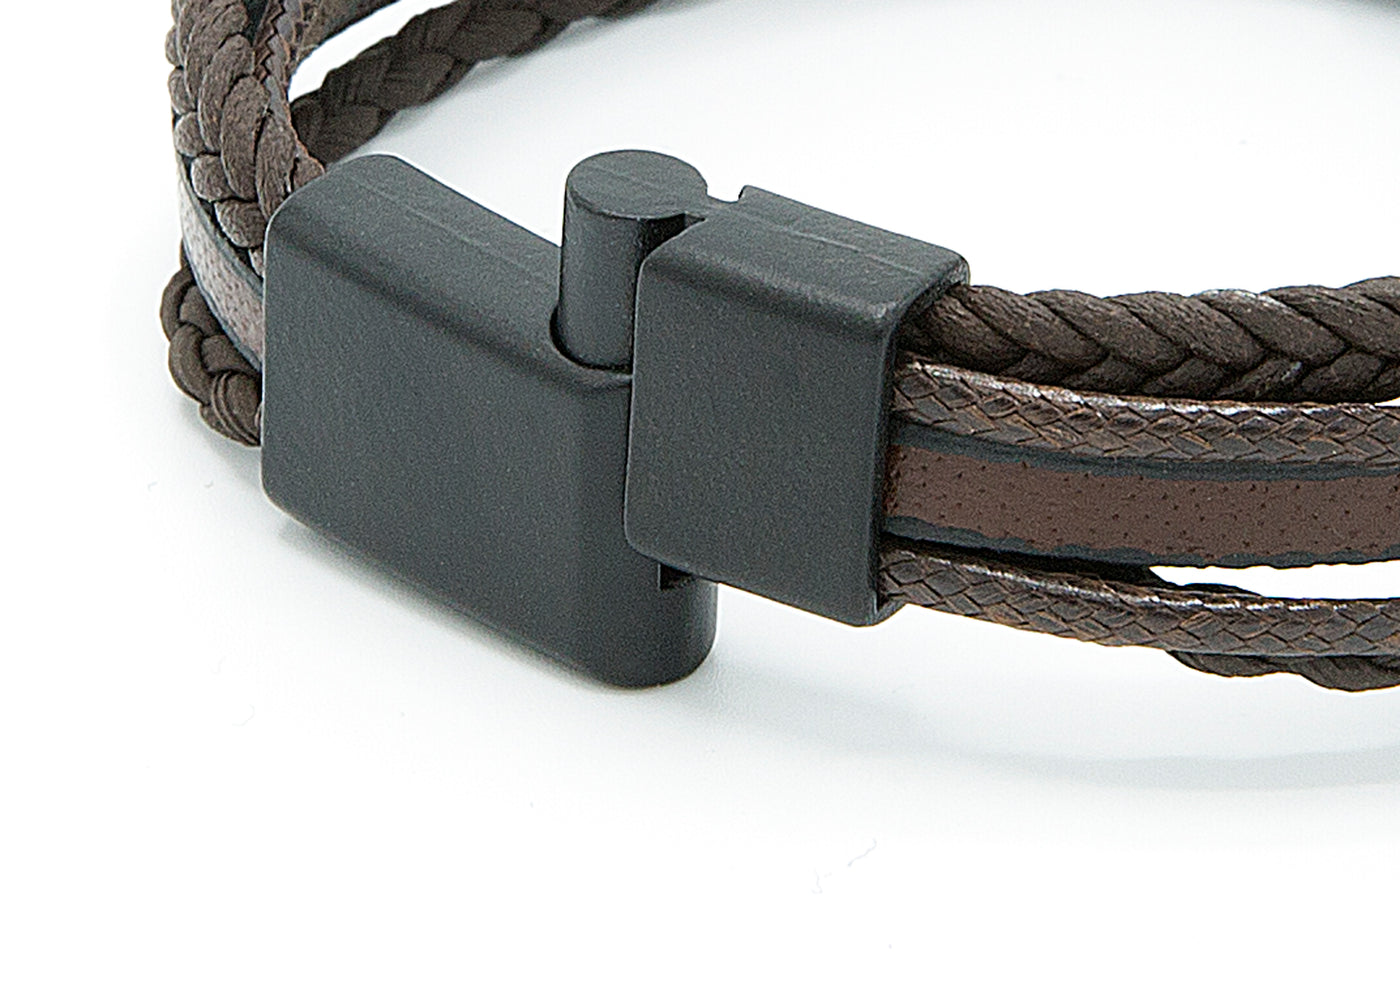 Black Multi-layered 15mm Genuine Leather Braided Bracelet Fathers Day Gift